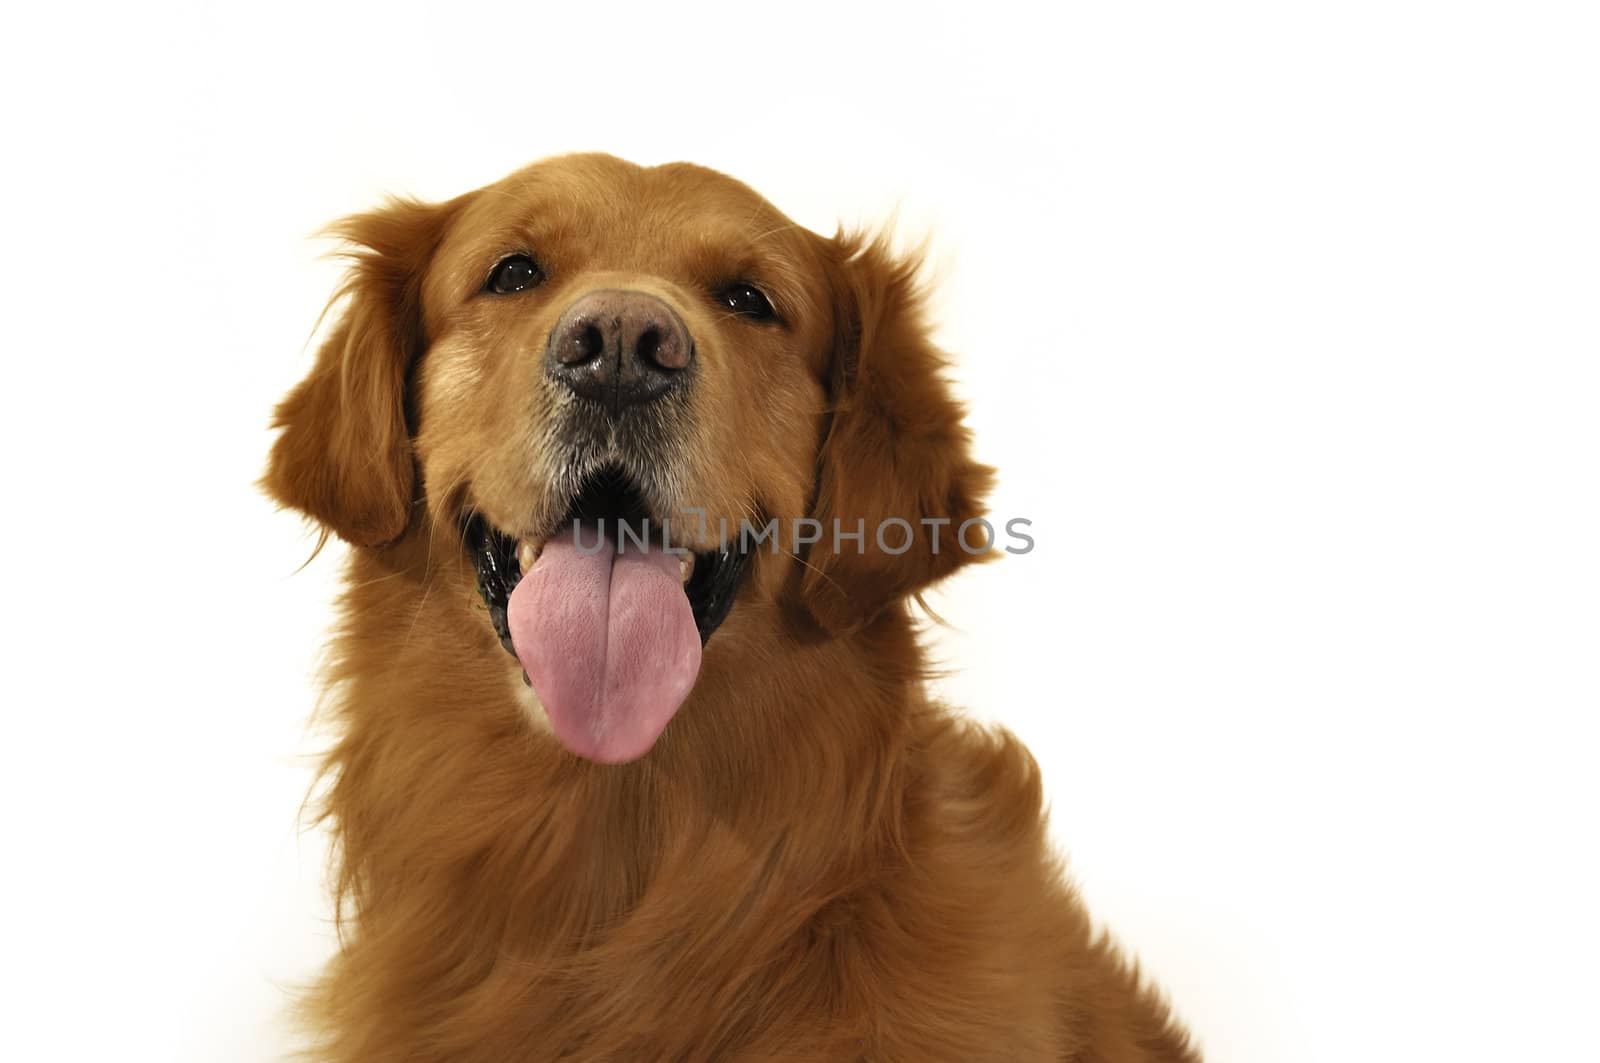 Golden retriever dog very expressive face, front, tongue. Happy and fun.
